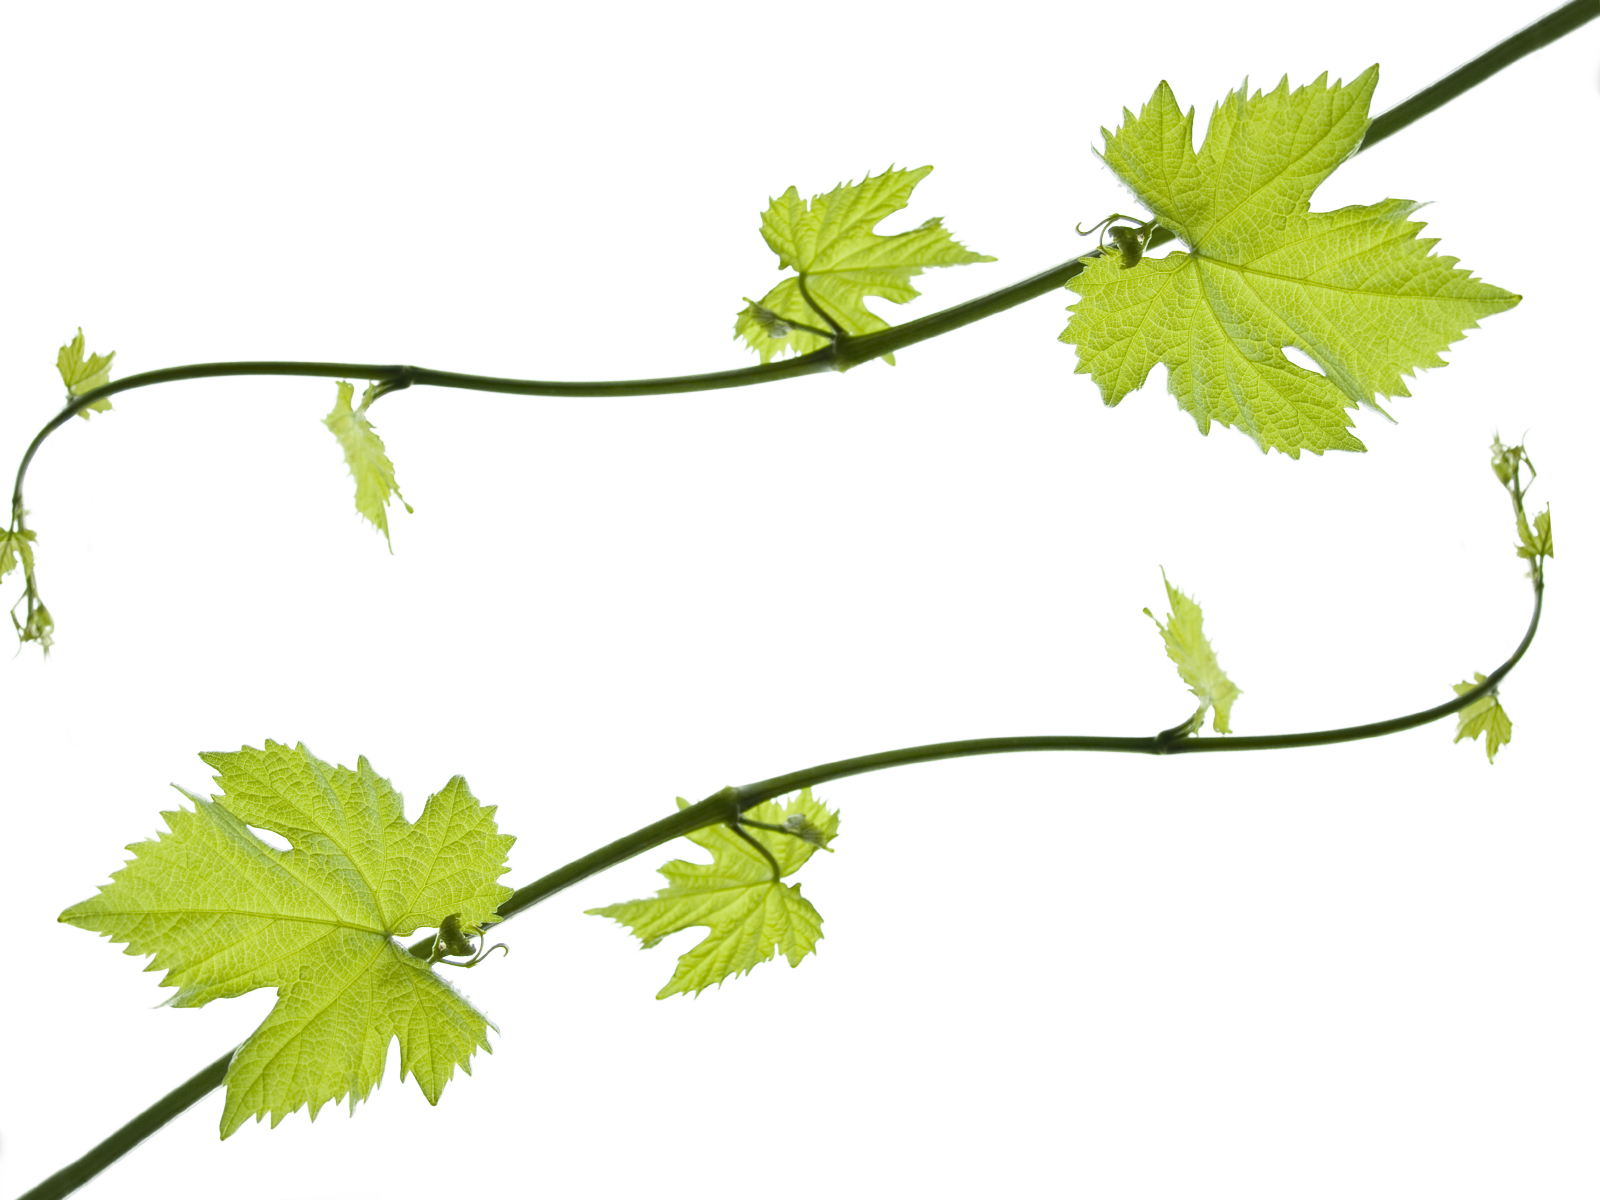 10 Grapevine Border Free Cliparts That You Can Download To You